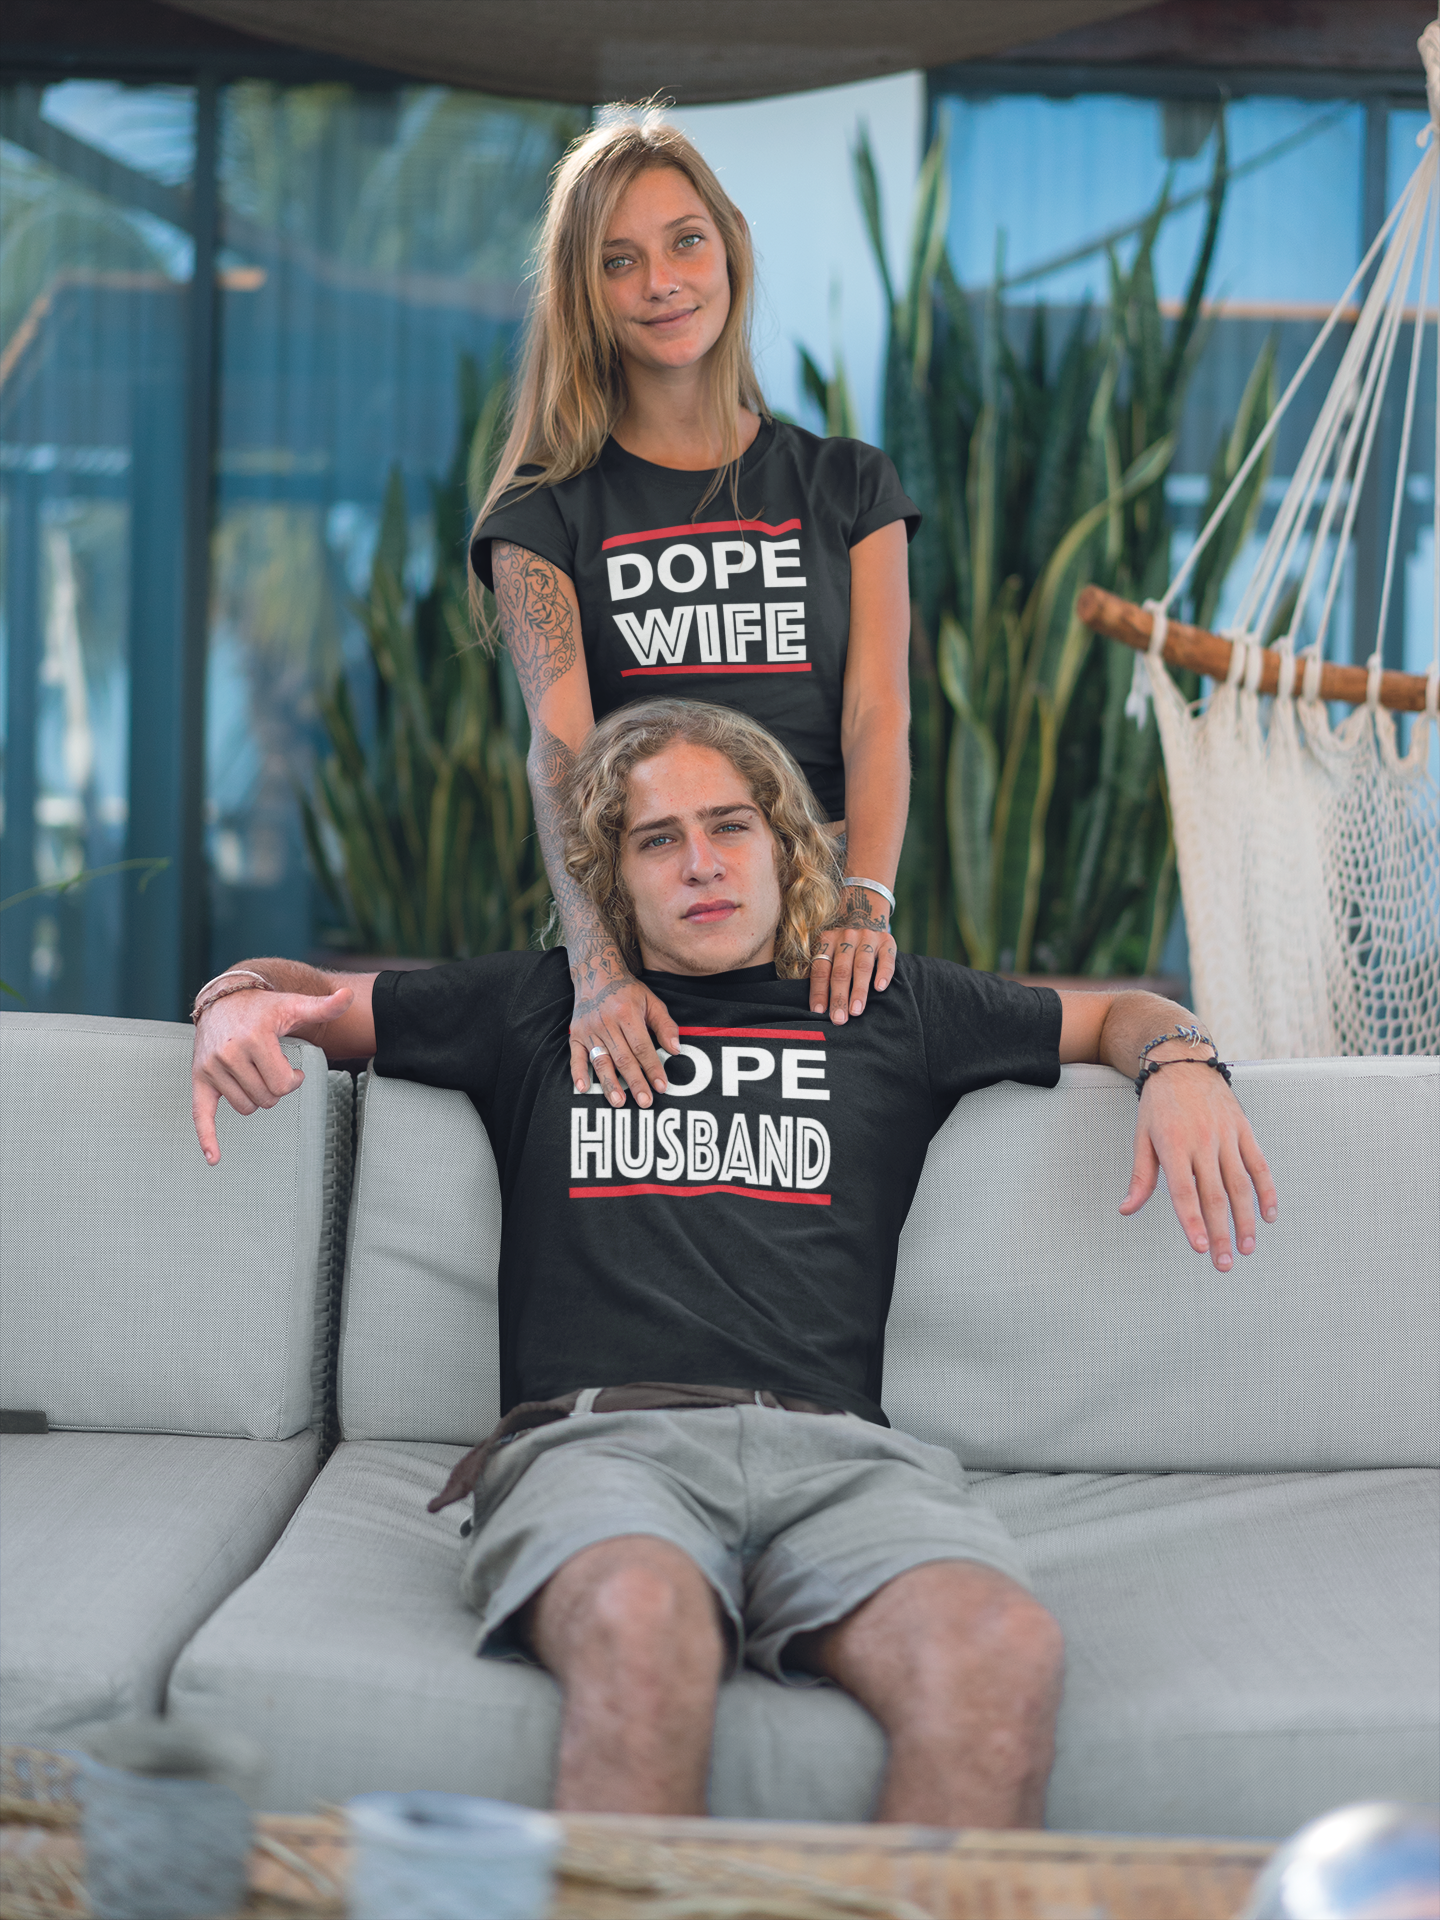 Couples - Dope Husband and Dope Wife